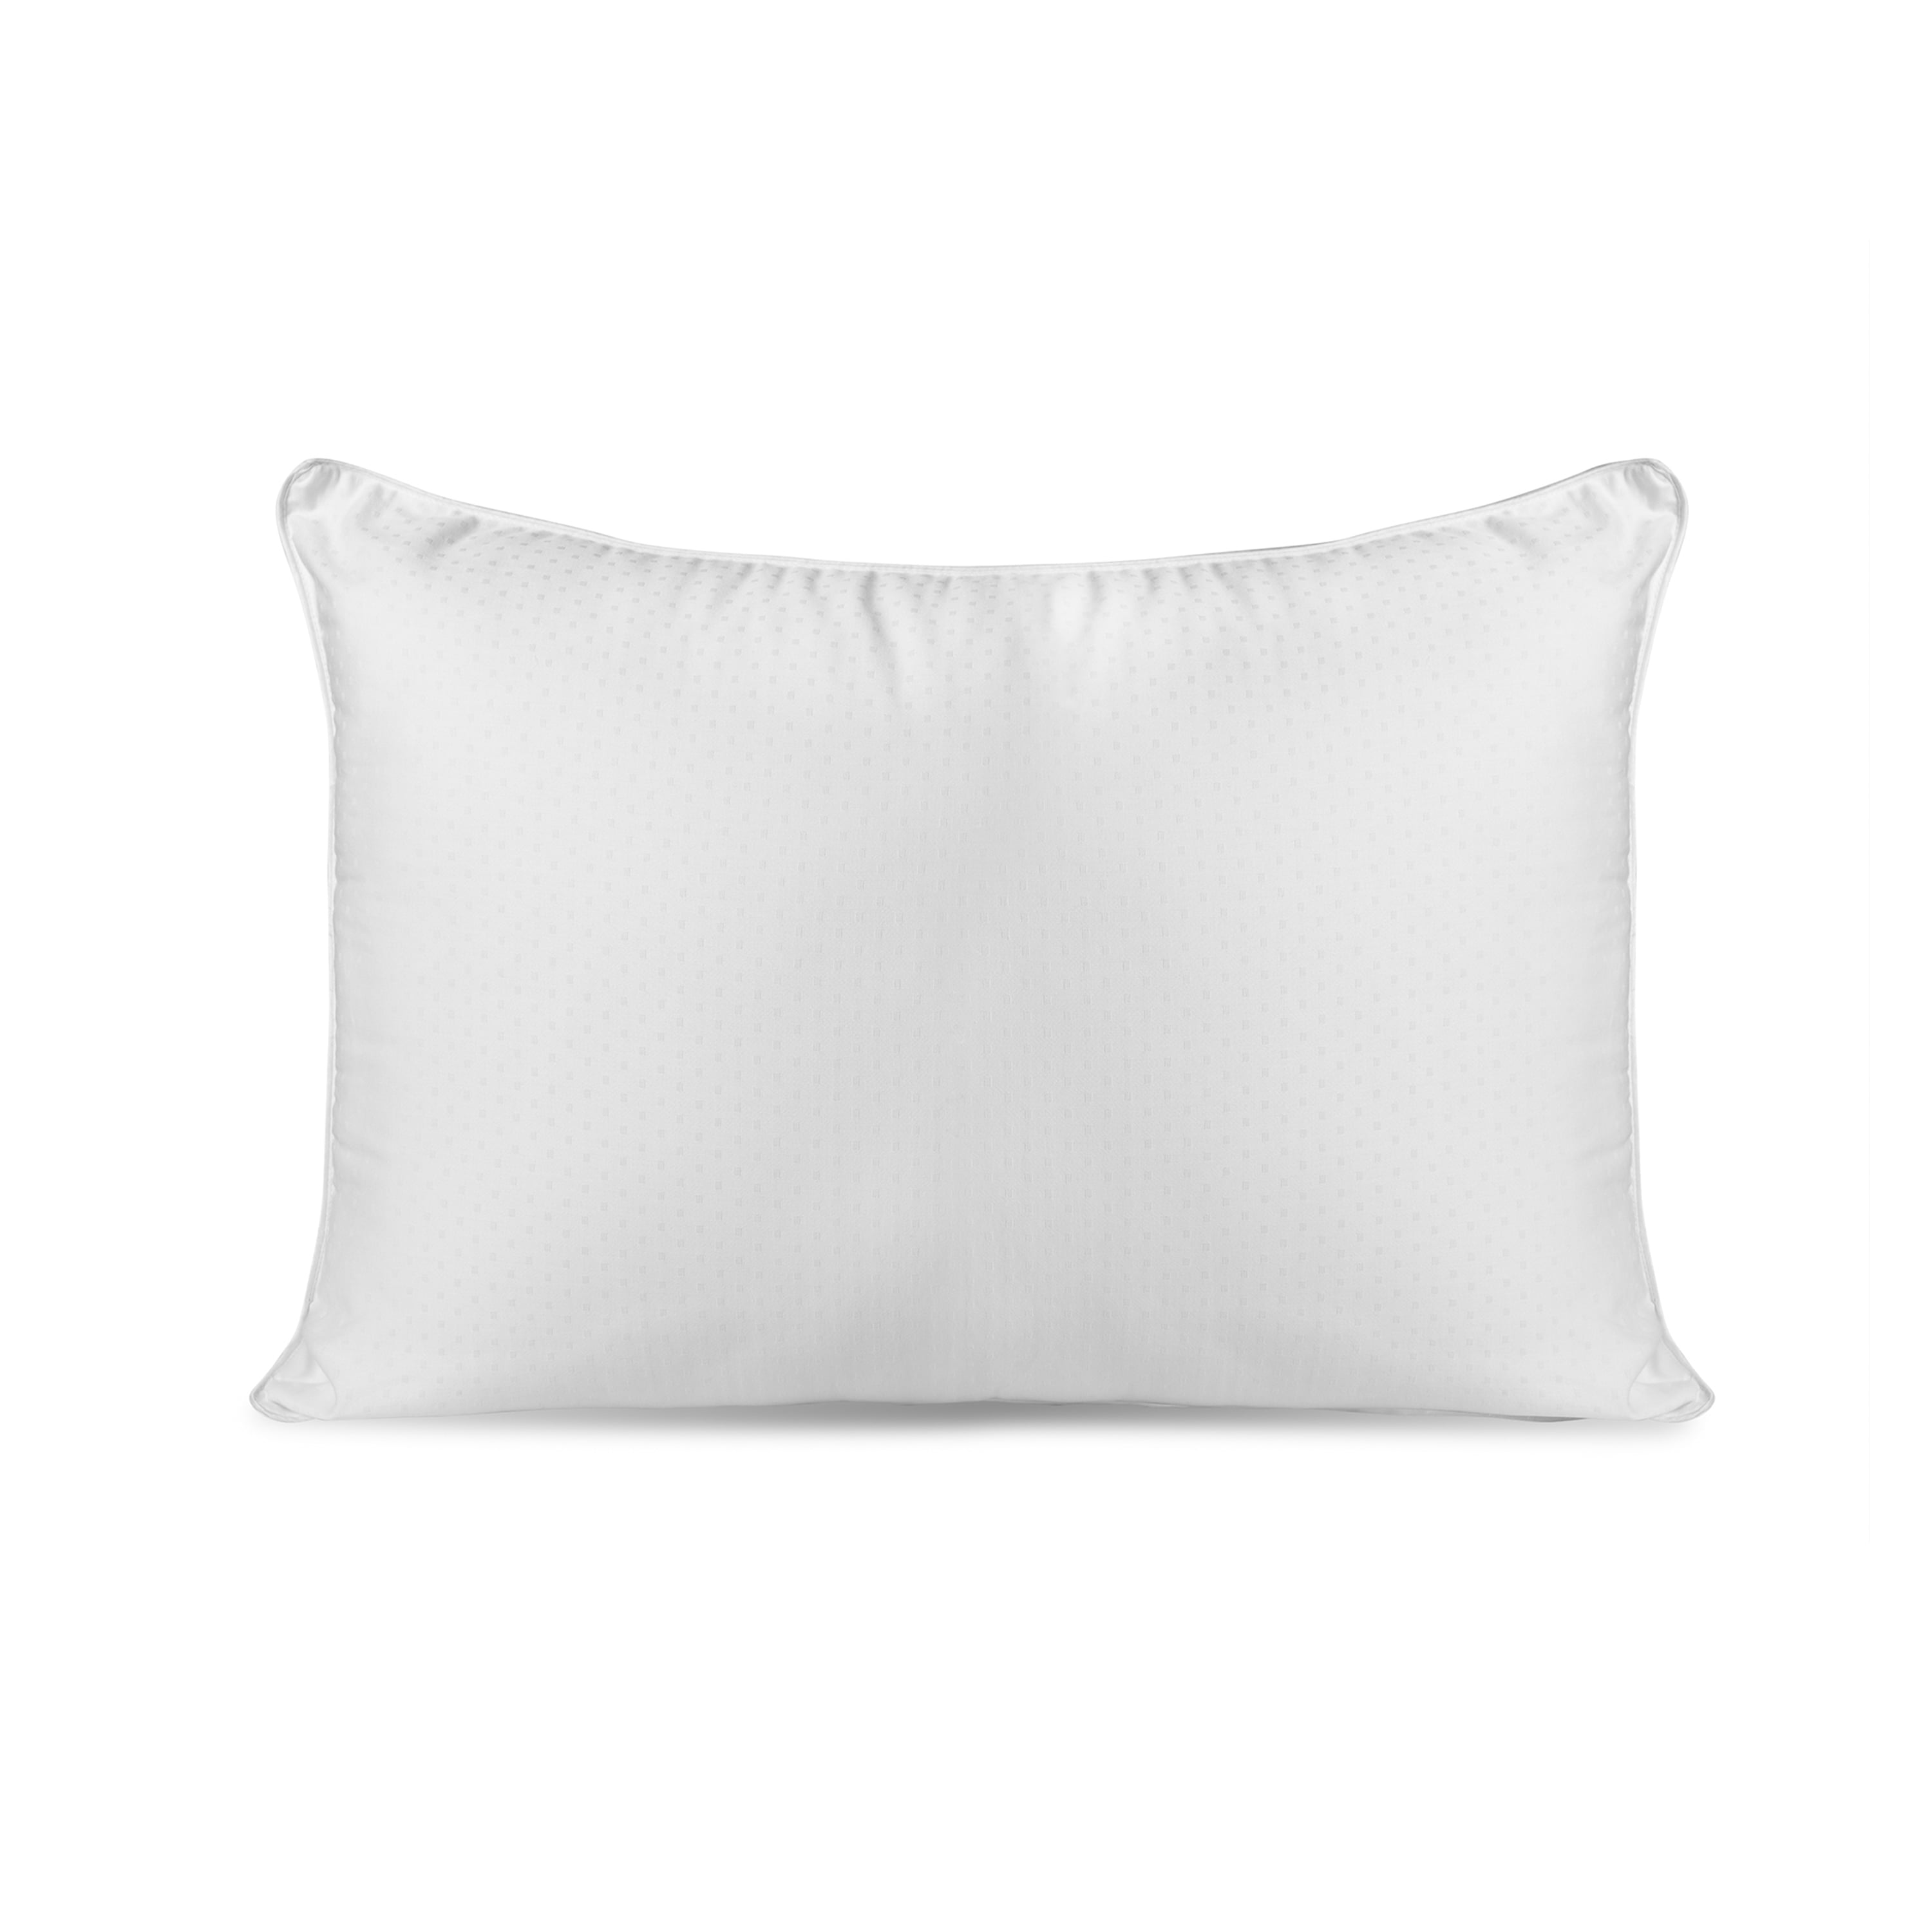 Easy Rest Queen Durafill Pillow 2 Year Limited Warranty 